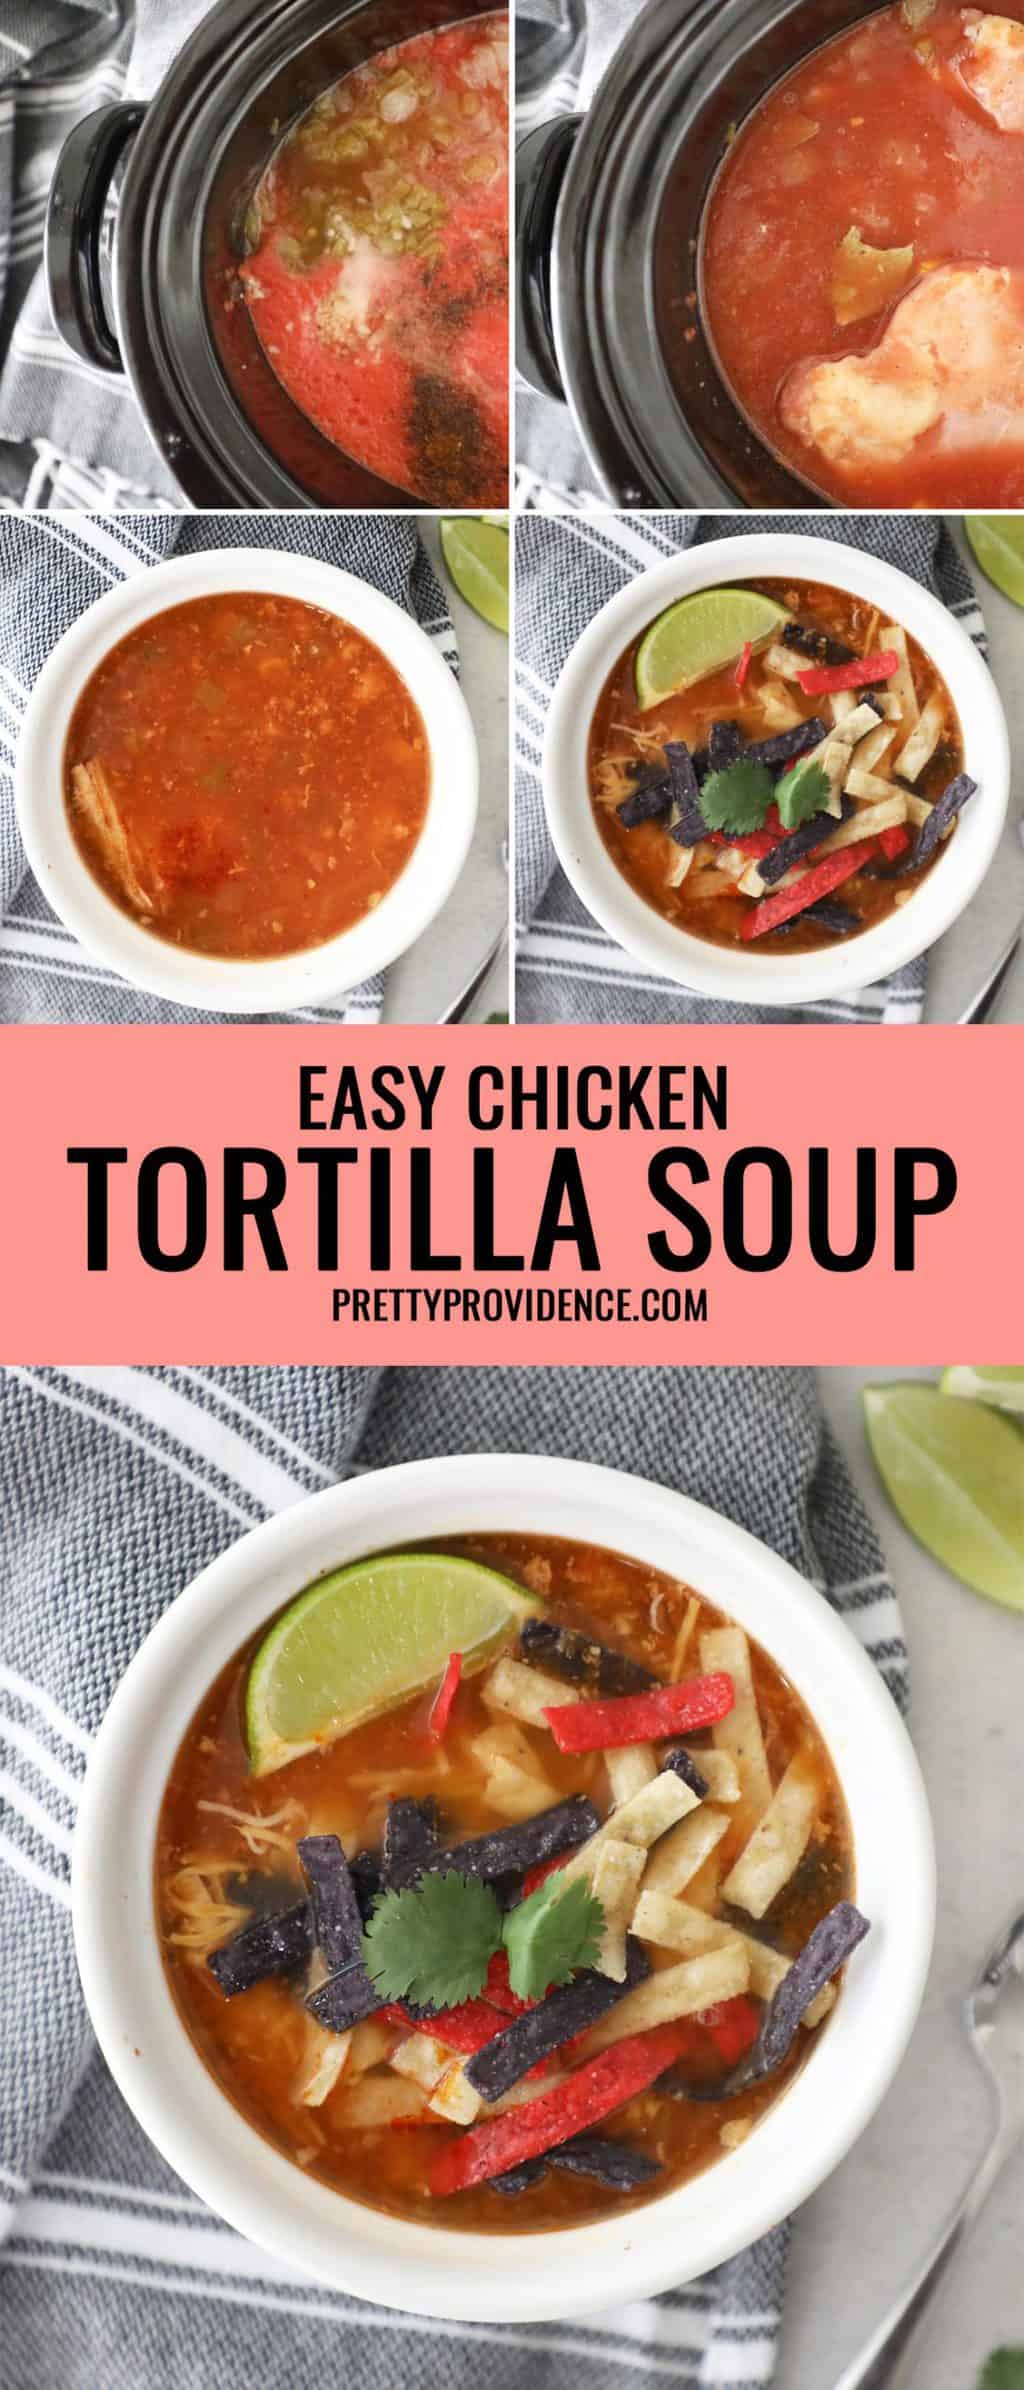 Slow Cooker Chicken Tortilla Soup - Pretty Providence